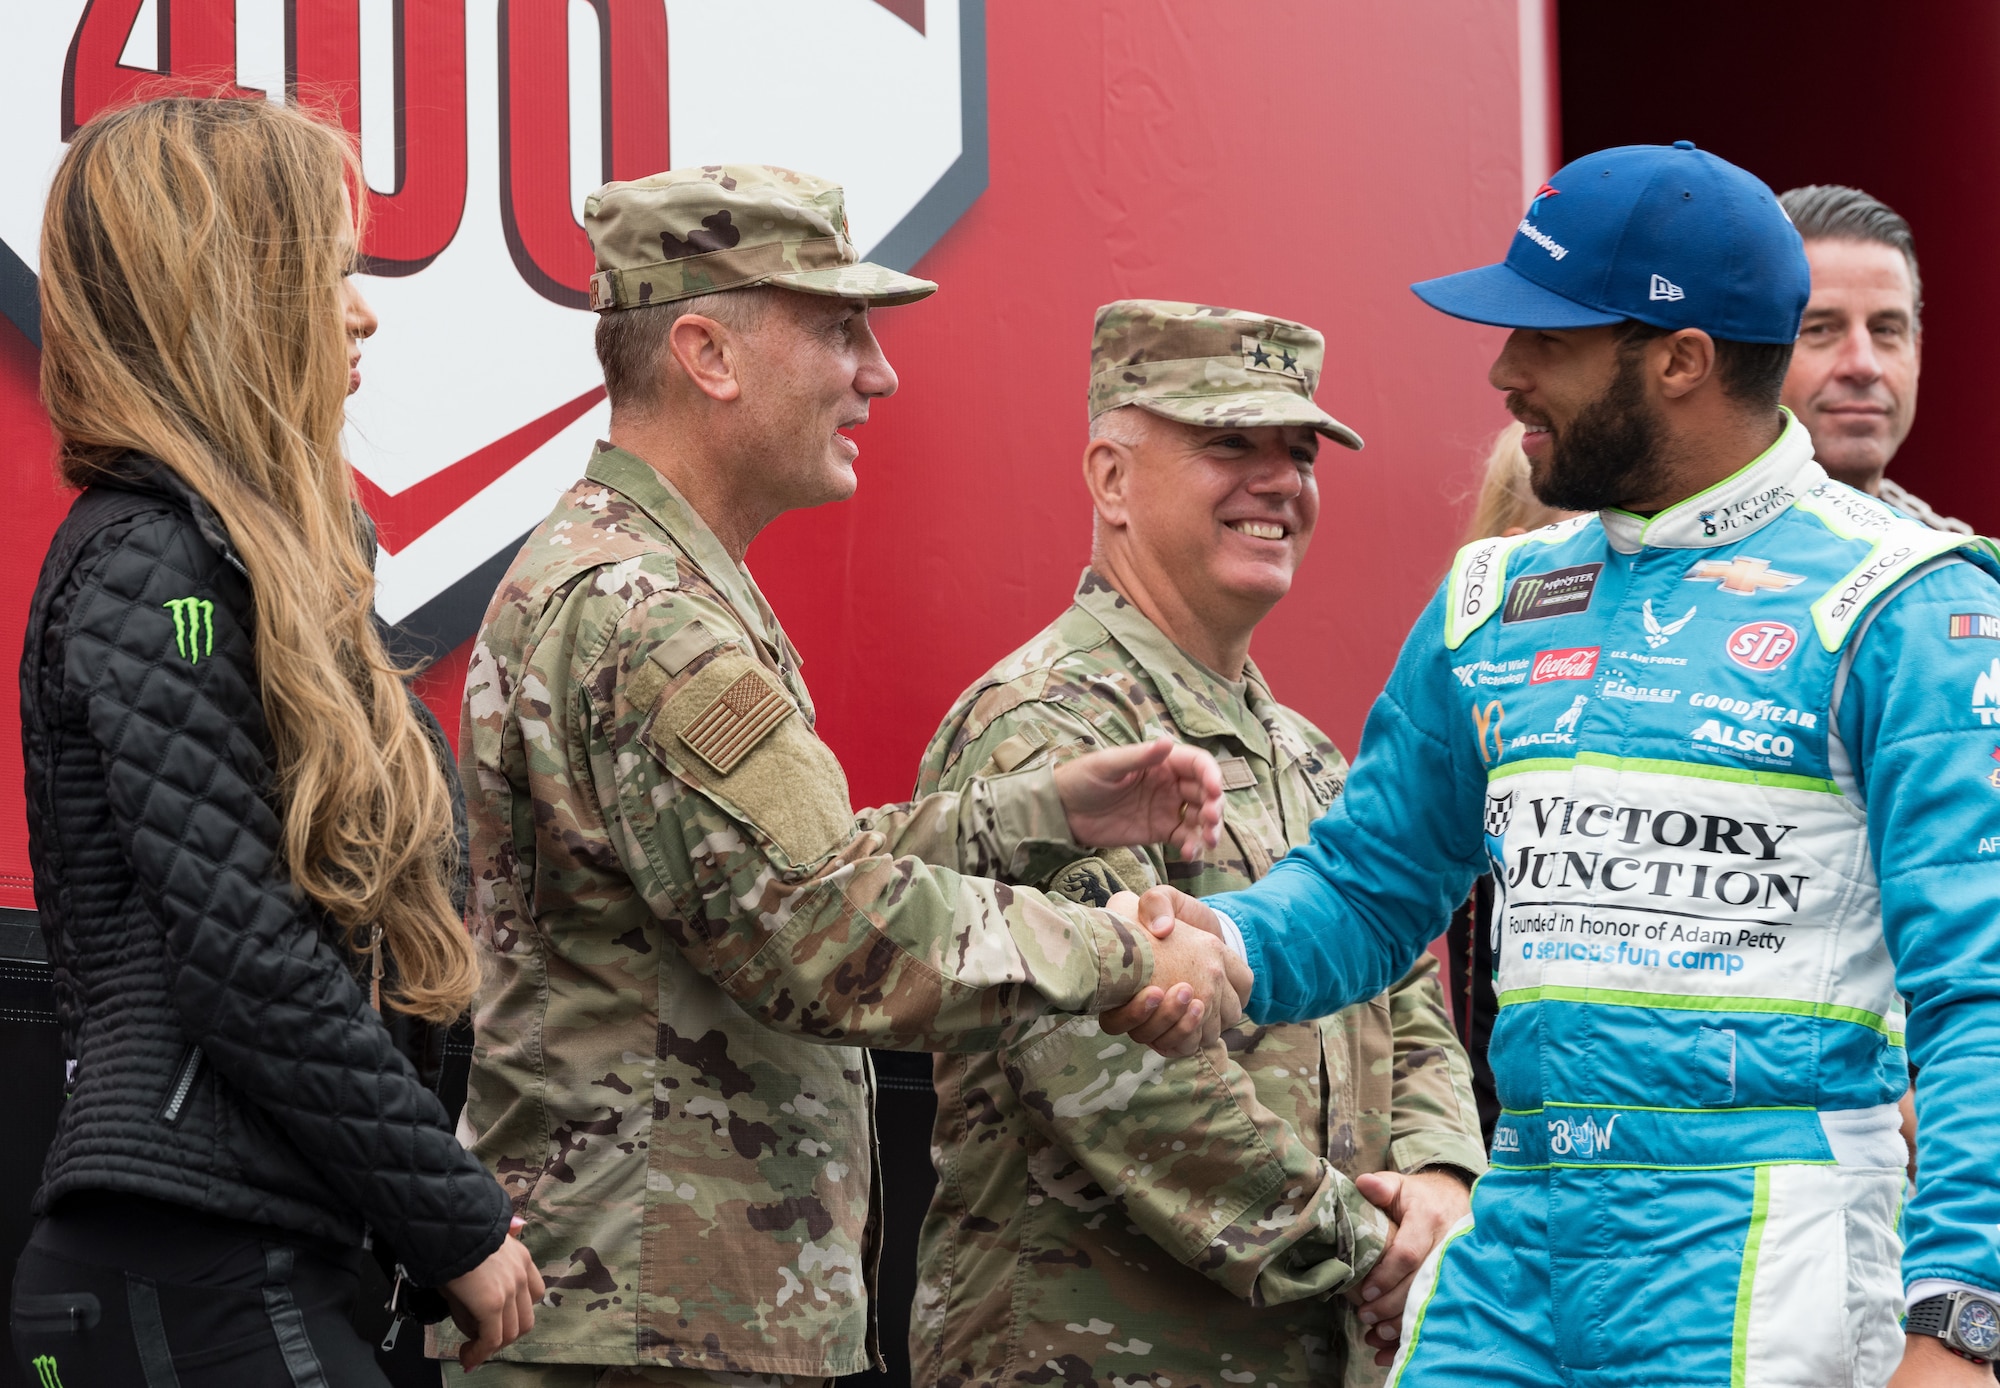 Maj. Gen. Clinton Crosier, assigned to the Deputy Chief of Staff for Strategy, Integration and Requirements, Headquarters U.S. Air Force, Arlington, Va., shakes hands with Bubba Wallace, driver of the No. 43 Victory Junction Chevrolet during driver introductions Oct. 6, 2019, at Dover International Speedway, Dover, Del. The U.S. Air Force is one of many sponsors of the No. 43 car that started in the 26th position for the "Drydene 400" Monster Energy NASCAR Cup Series playoff race. (U.S. Air Force photo by Roland Balik)